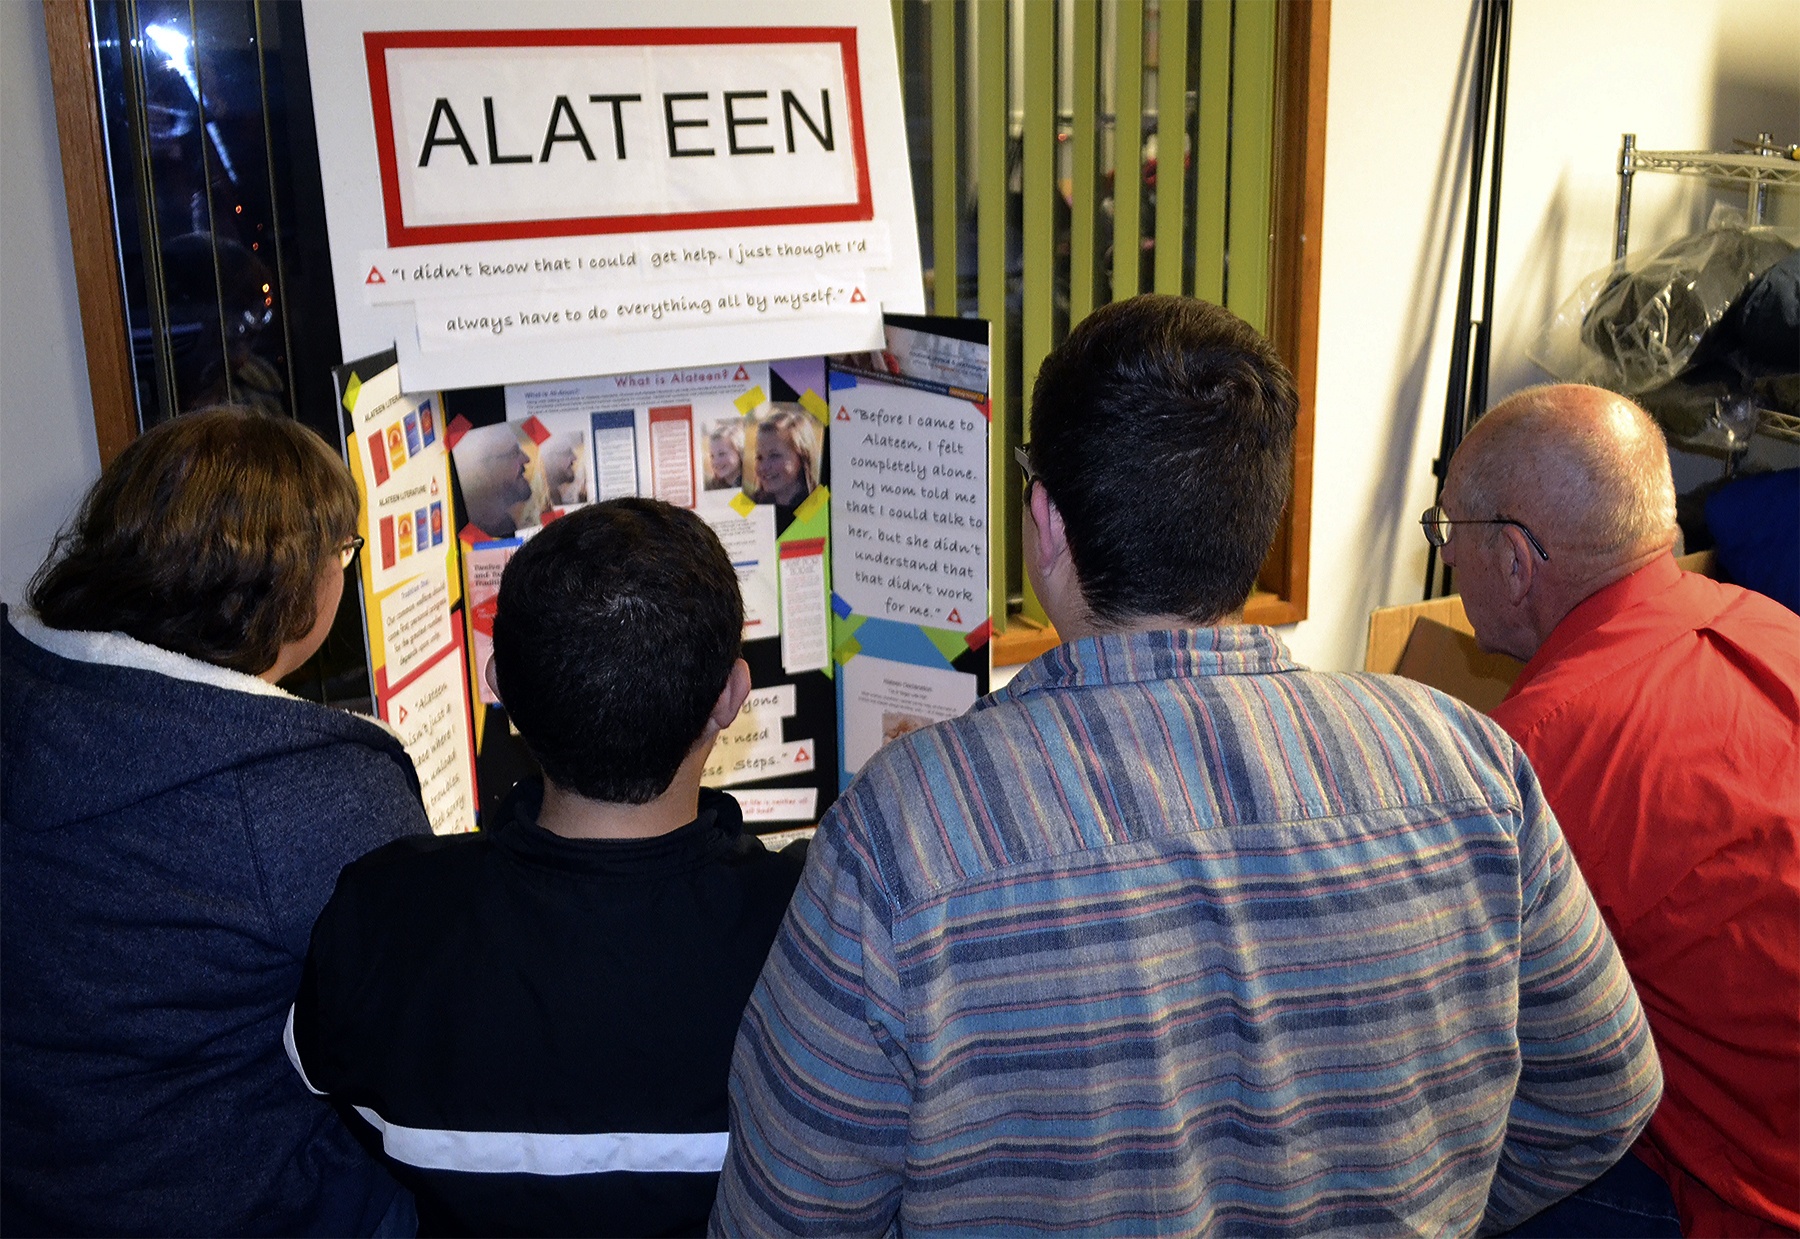 Alateen helps kids deal with alcoholics